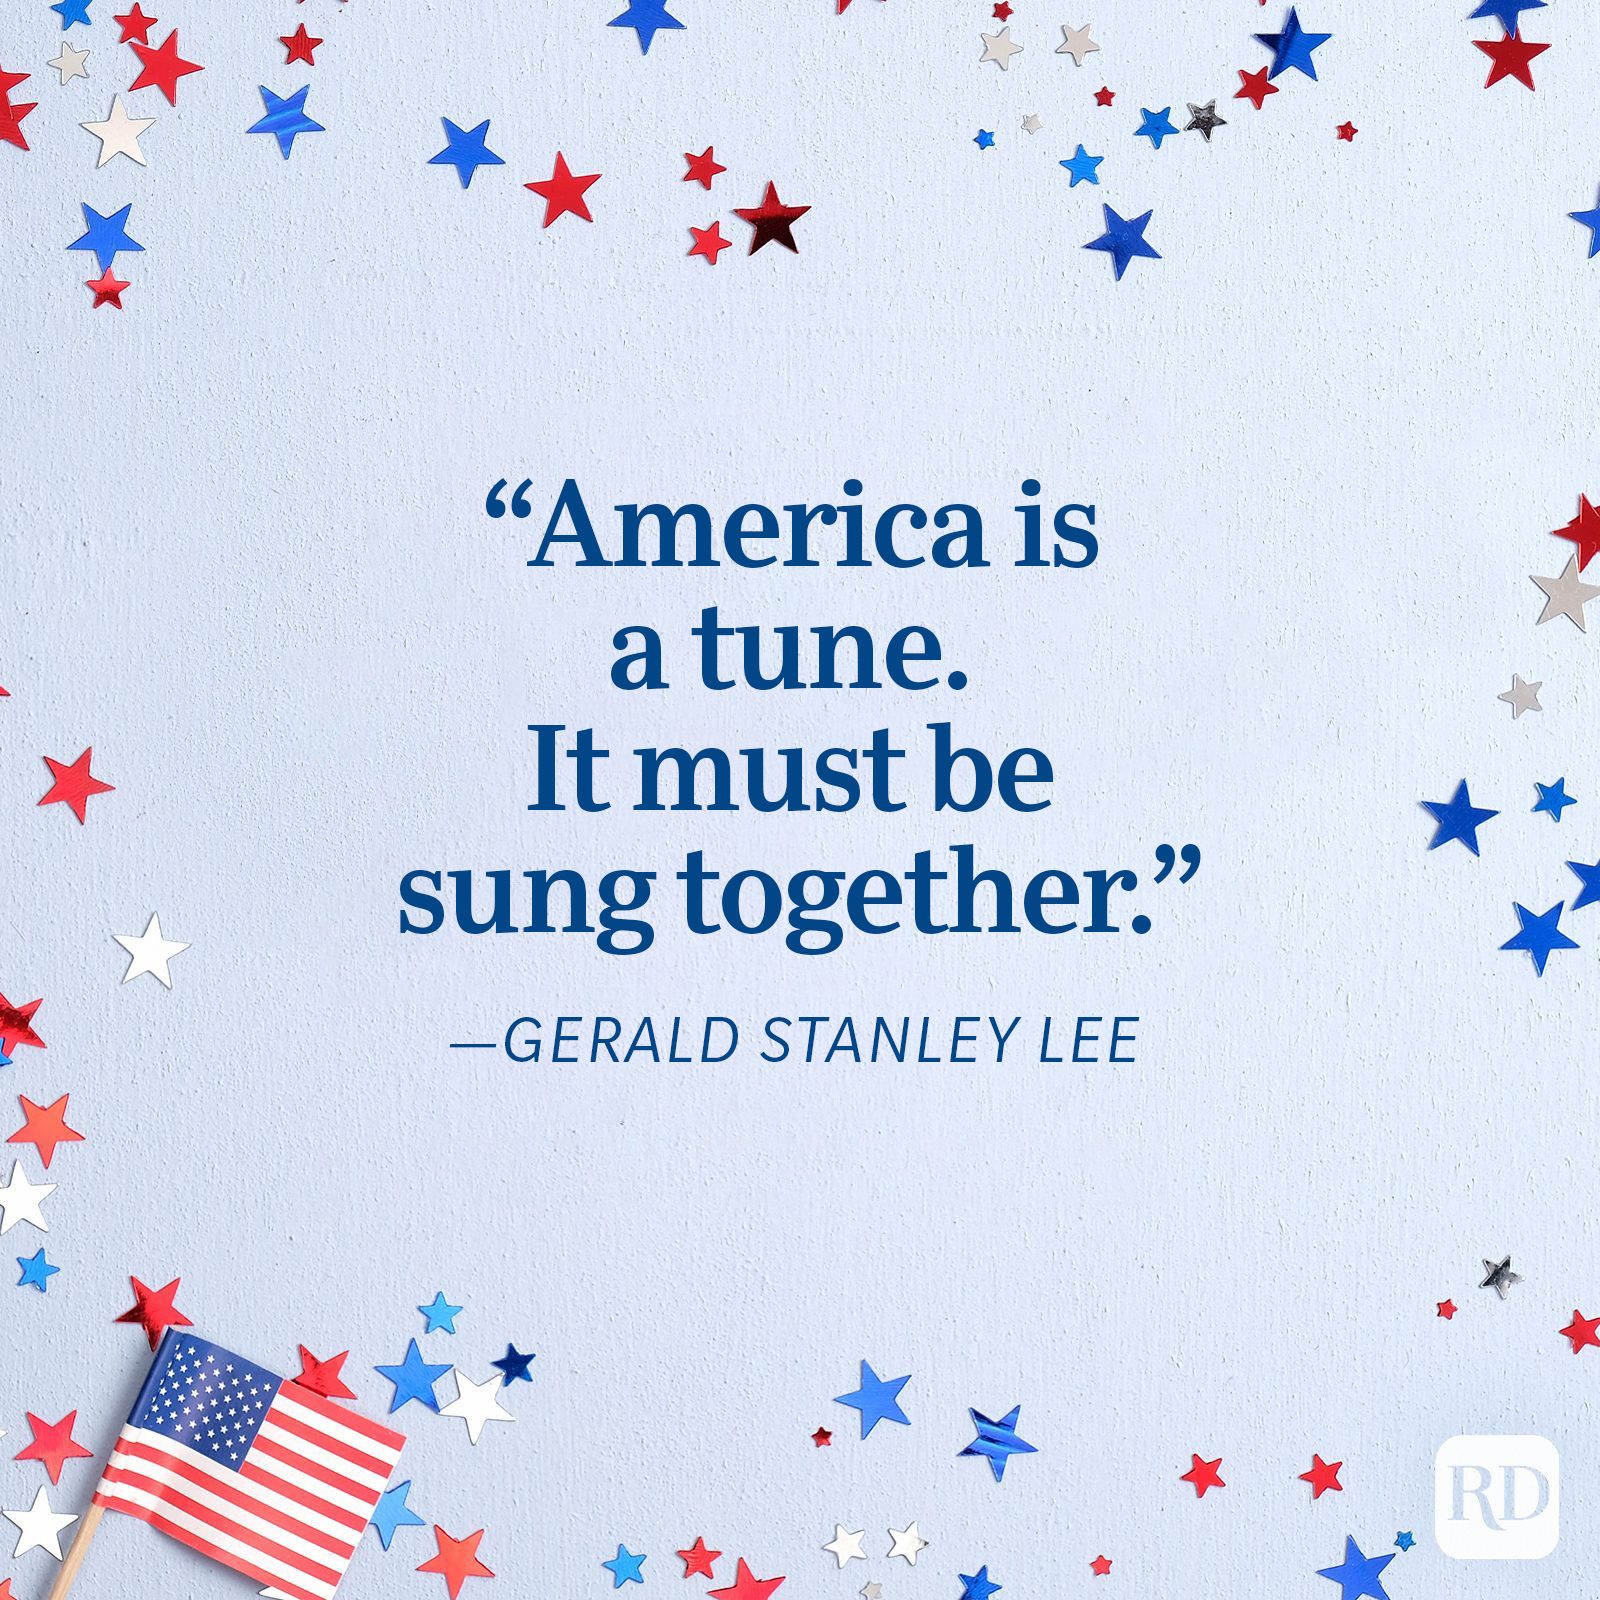 4th of July Quotes: 70 Quotes to Share on Independence Day 2023